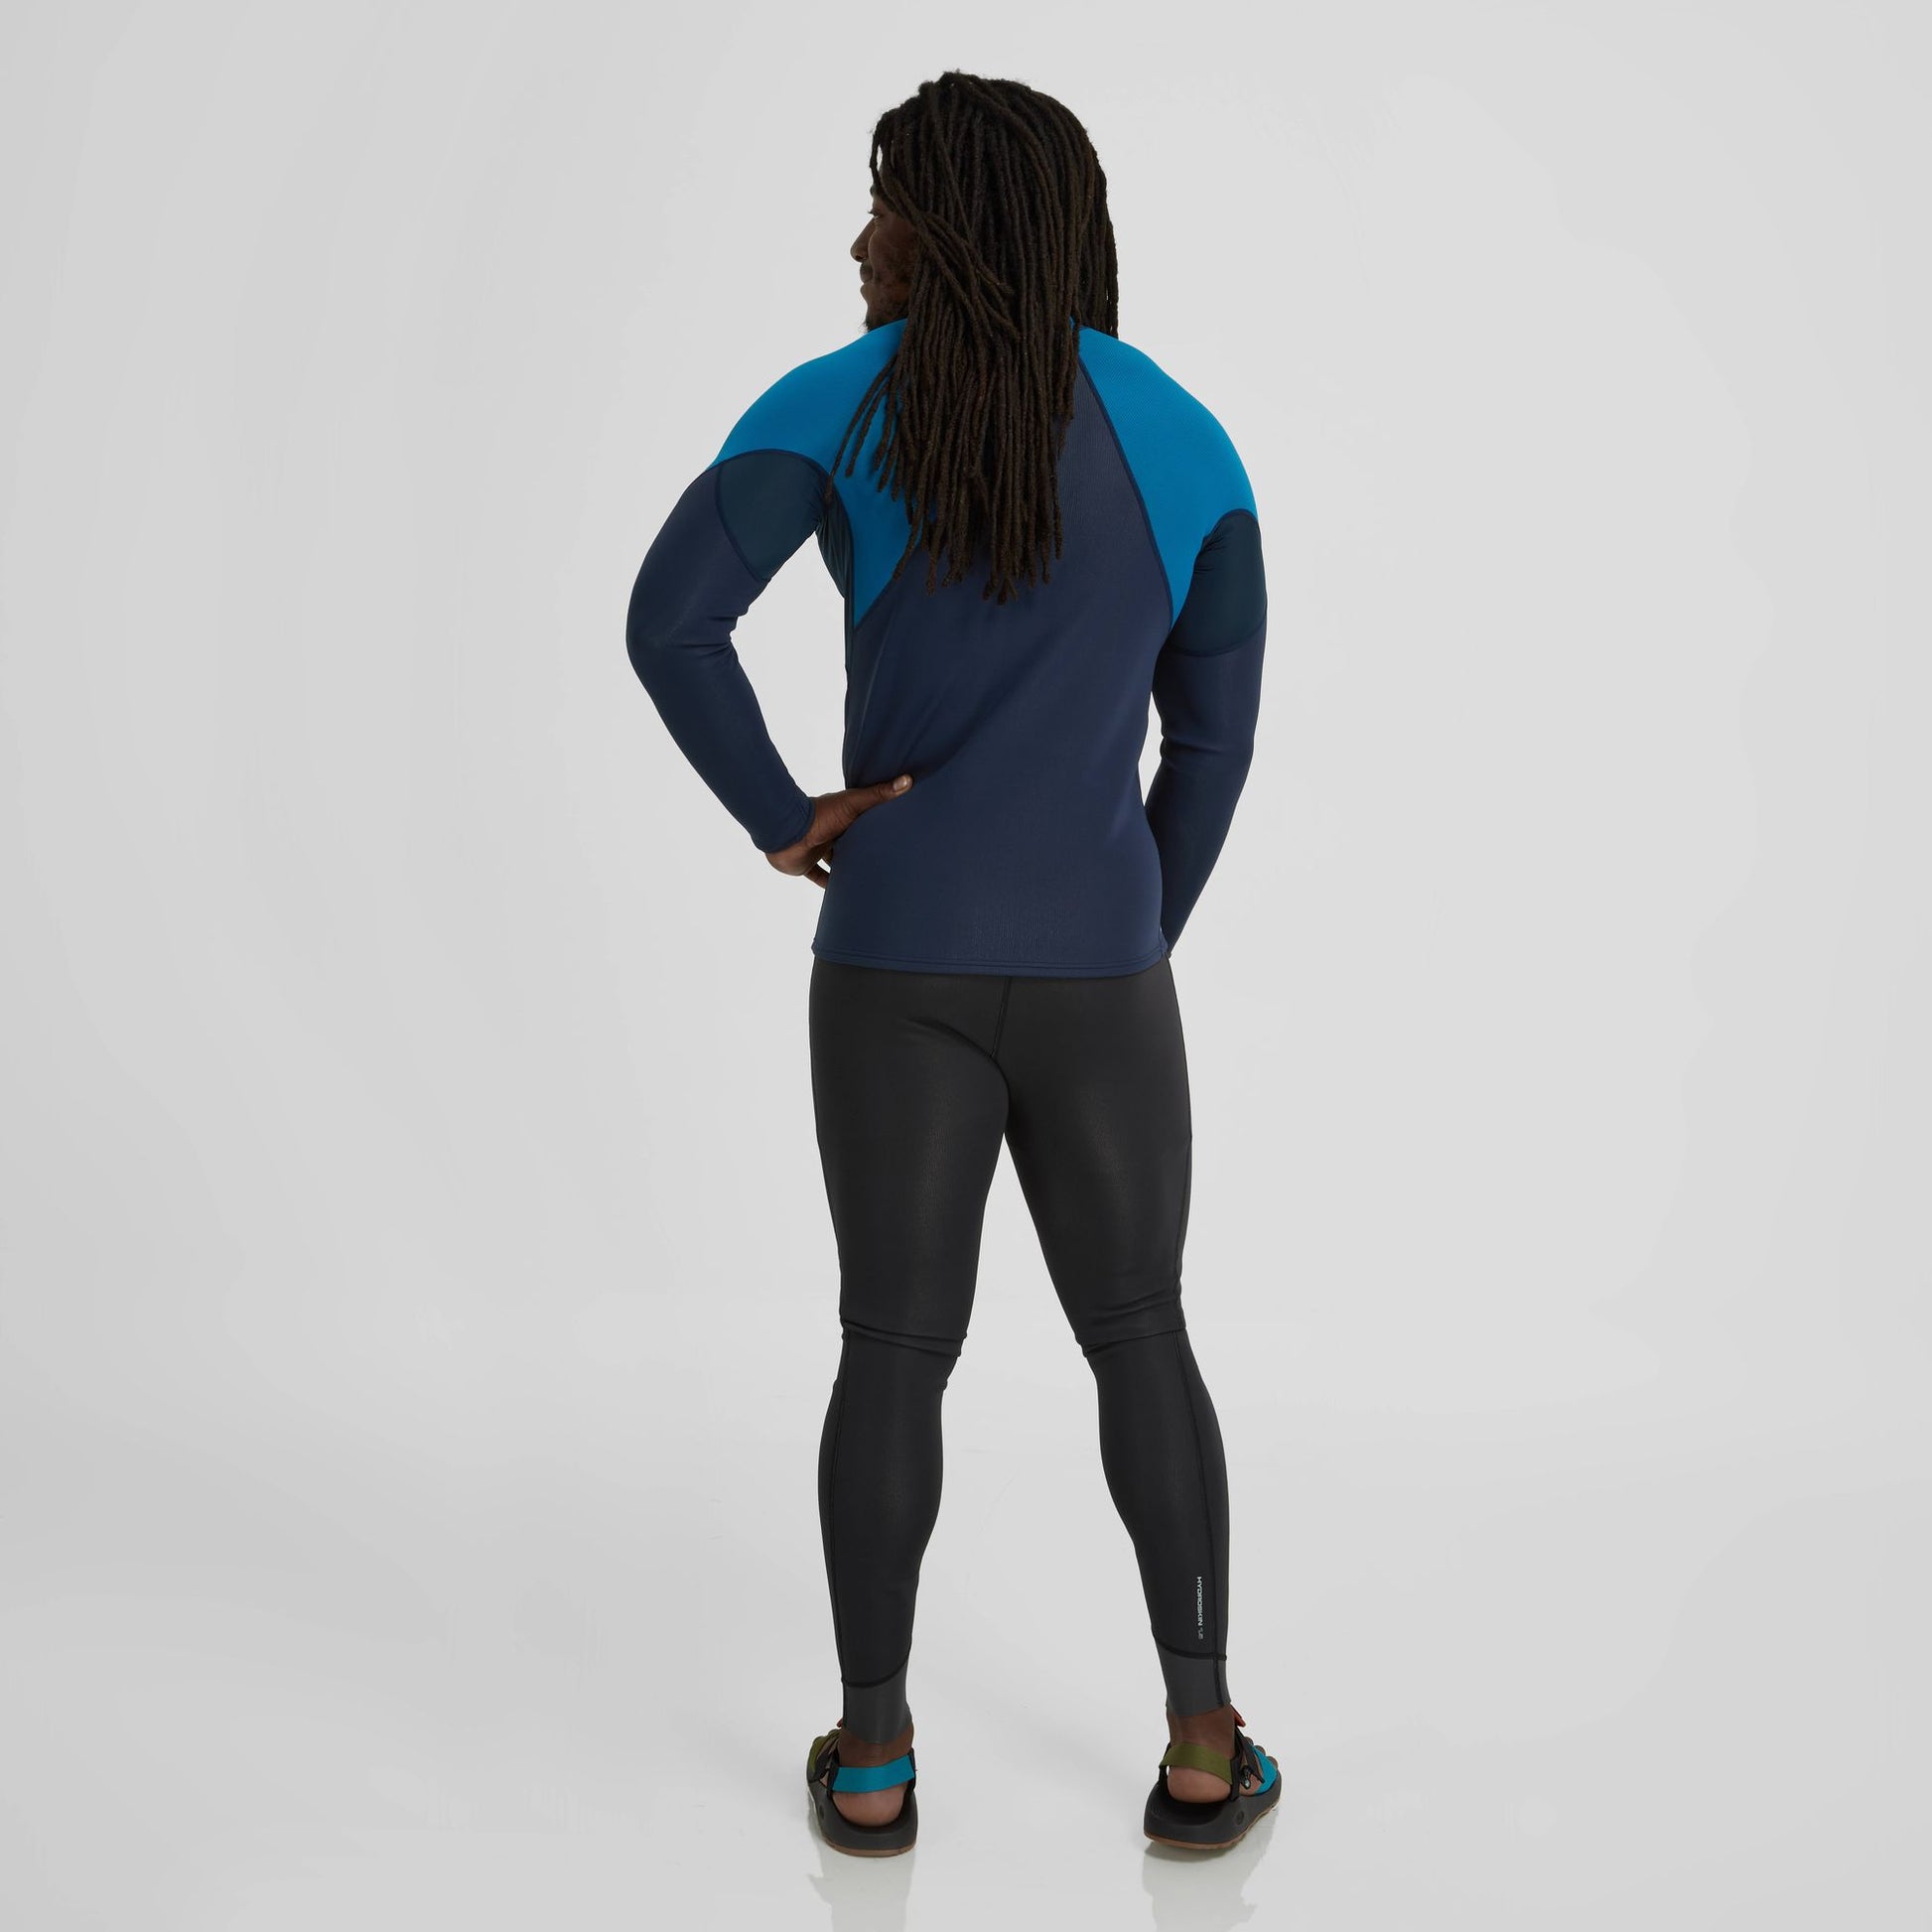 The back view of a man wearing a NRS Hydroskin 0.5 long sleeve shirt, an insulating top.